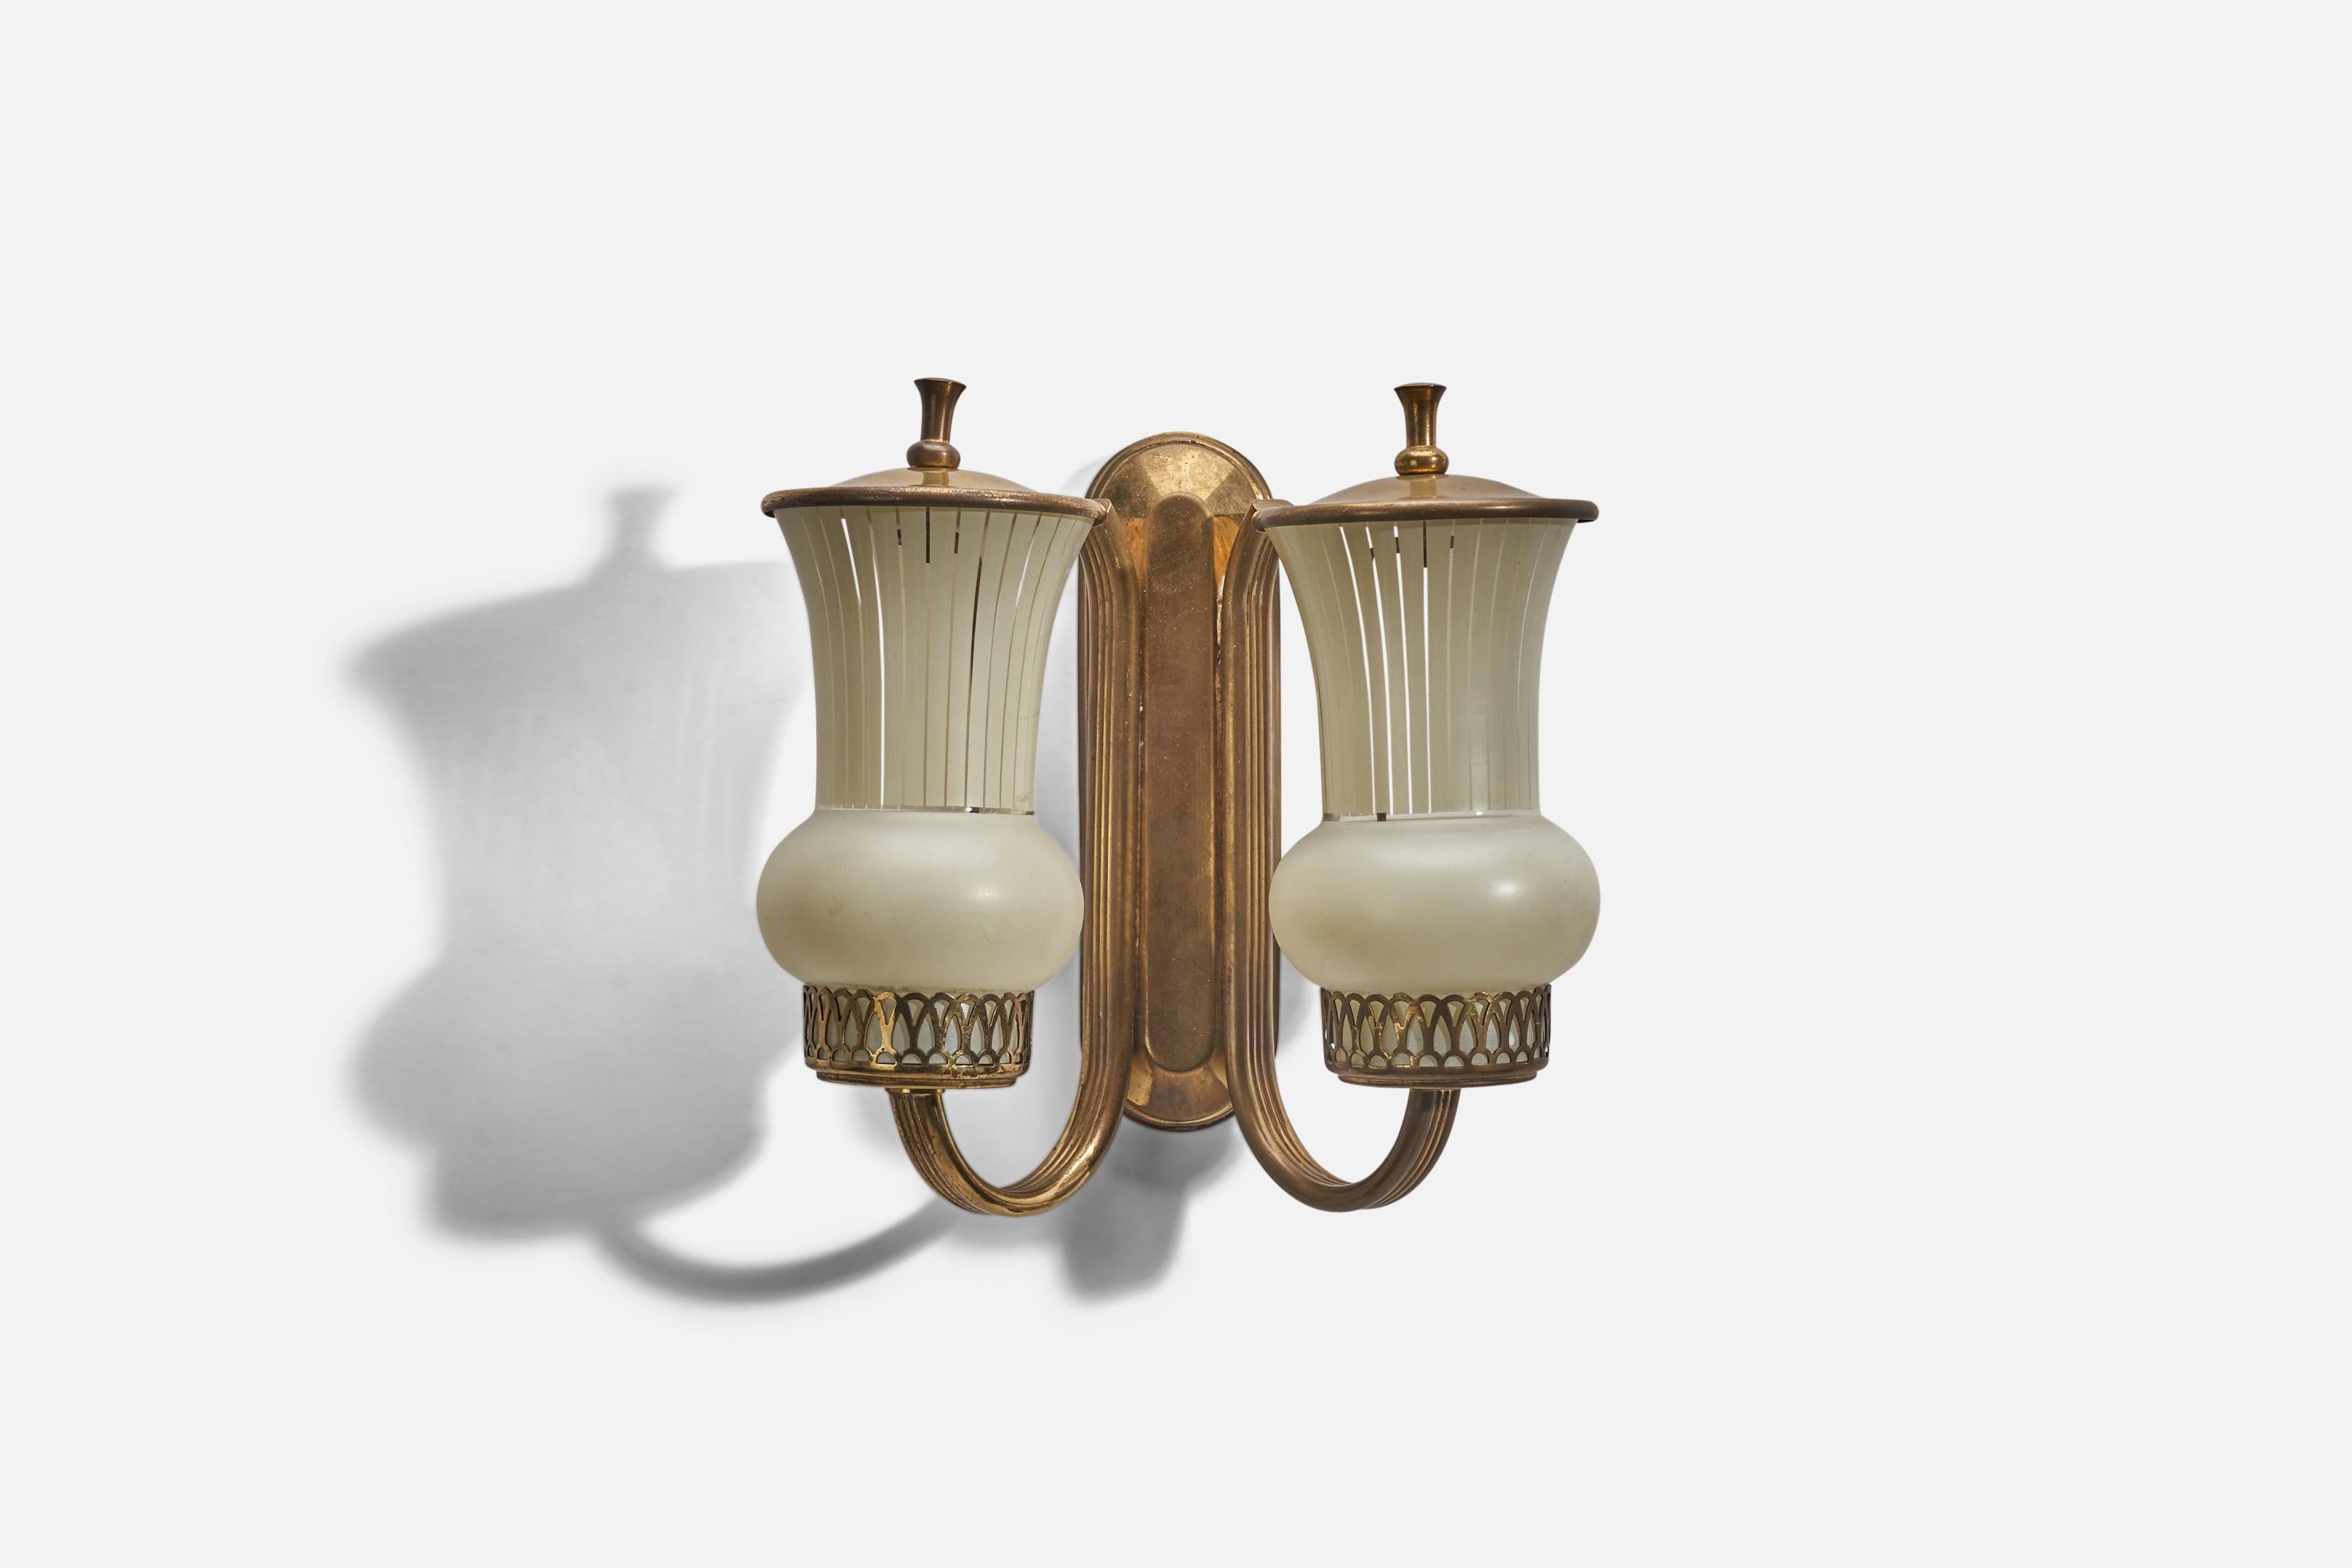 A pair of glass and brass sconces designed and produced in Sweden, 1940s. 

Dimensions of Back Plate (inches) : 7.75 x 2.25 x 1 (Height x Width x Depth)

Sockets take E-14 bulbs.

There is no maximum wattage stated on the fixtures.